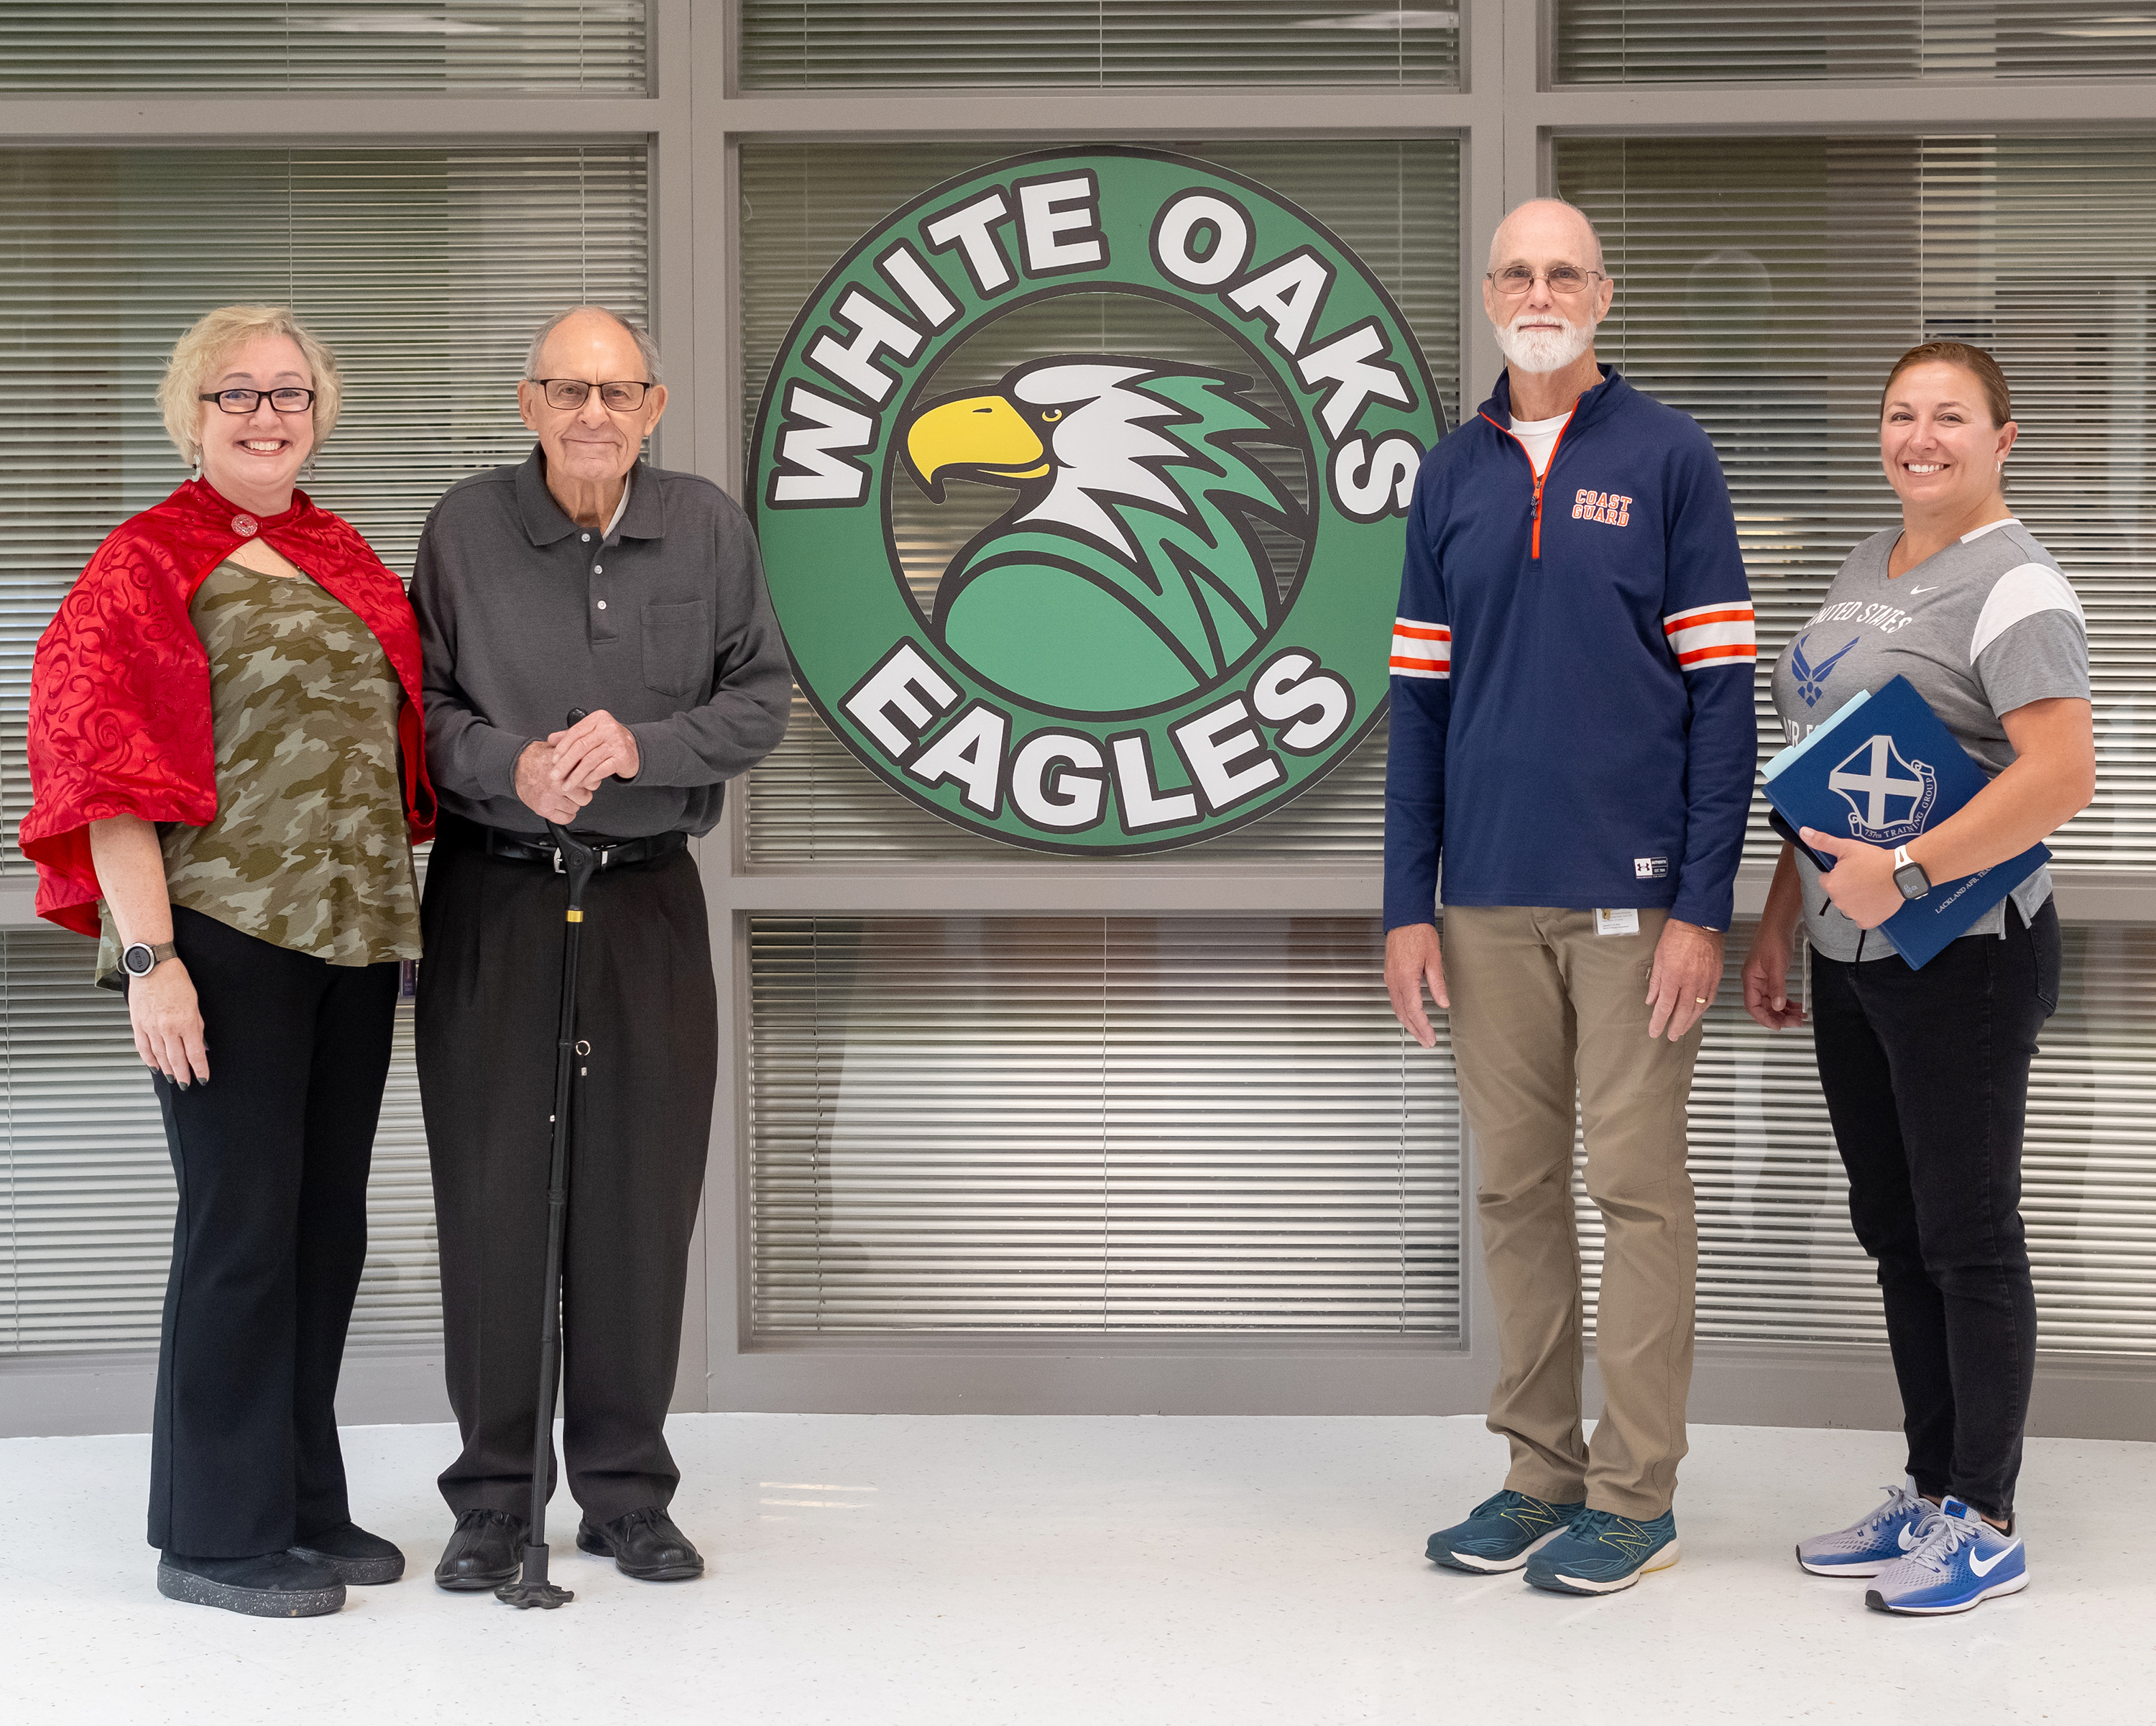 From left: Sgt. DiBacco, Capt. Stuntz, Capt. Peek, and MSgt. Pruismann stand in front of the White Oaks Elementary School logo.